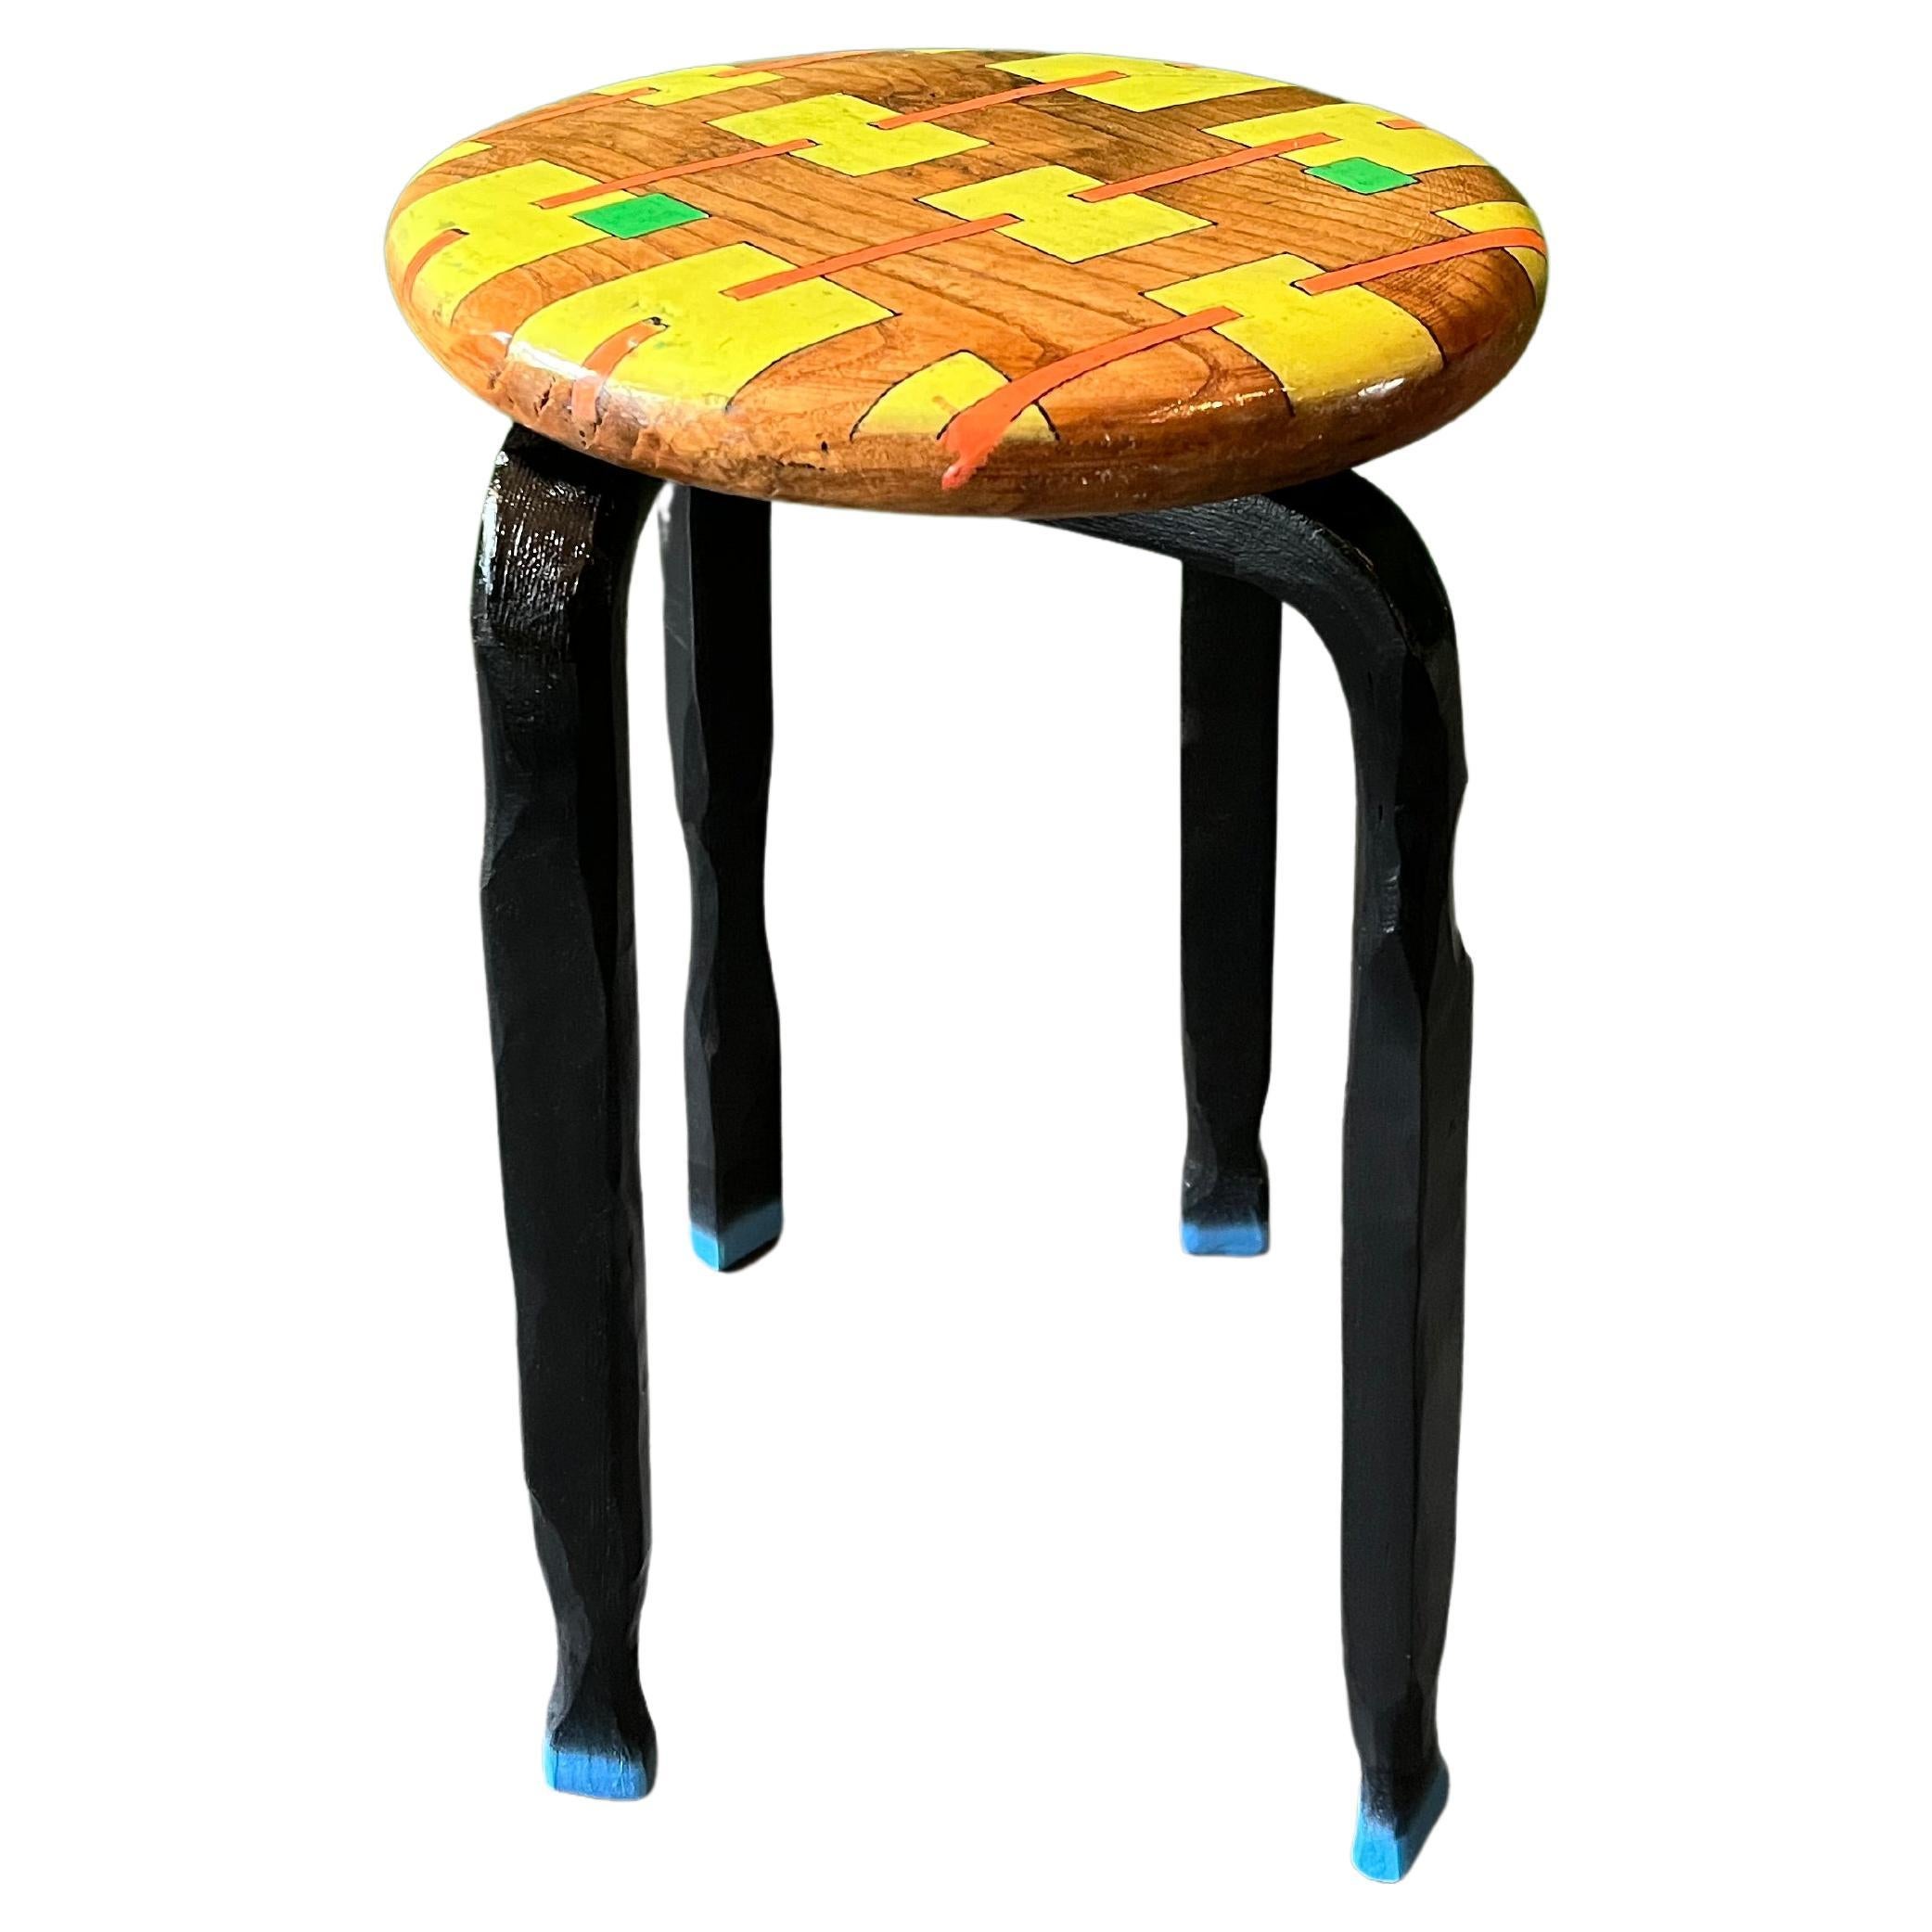 Flying Saucer Rock'n'Roll Stool by Markus Friedrich Staab 2022 For Sale